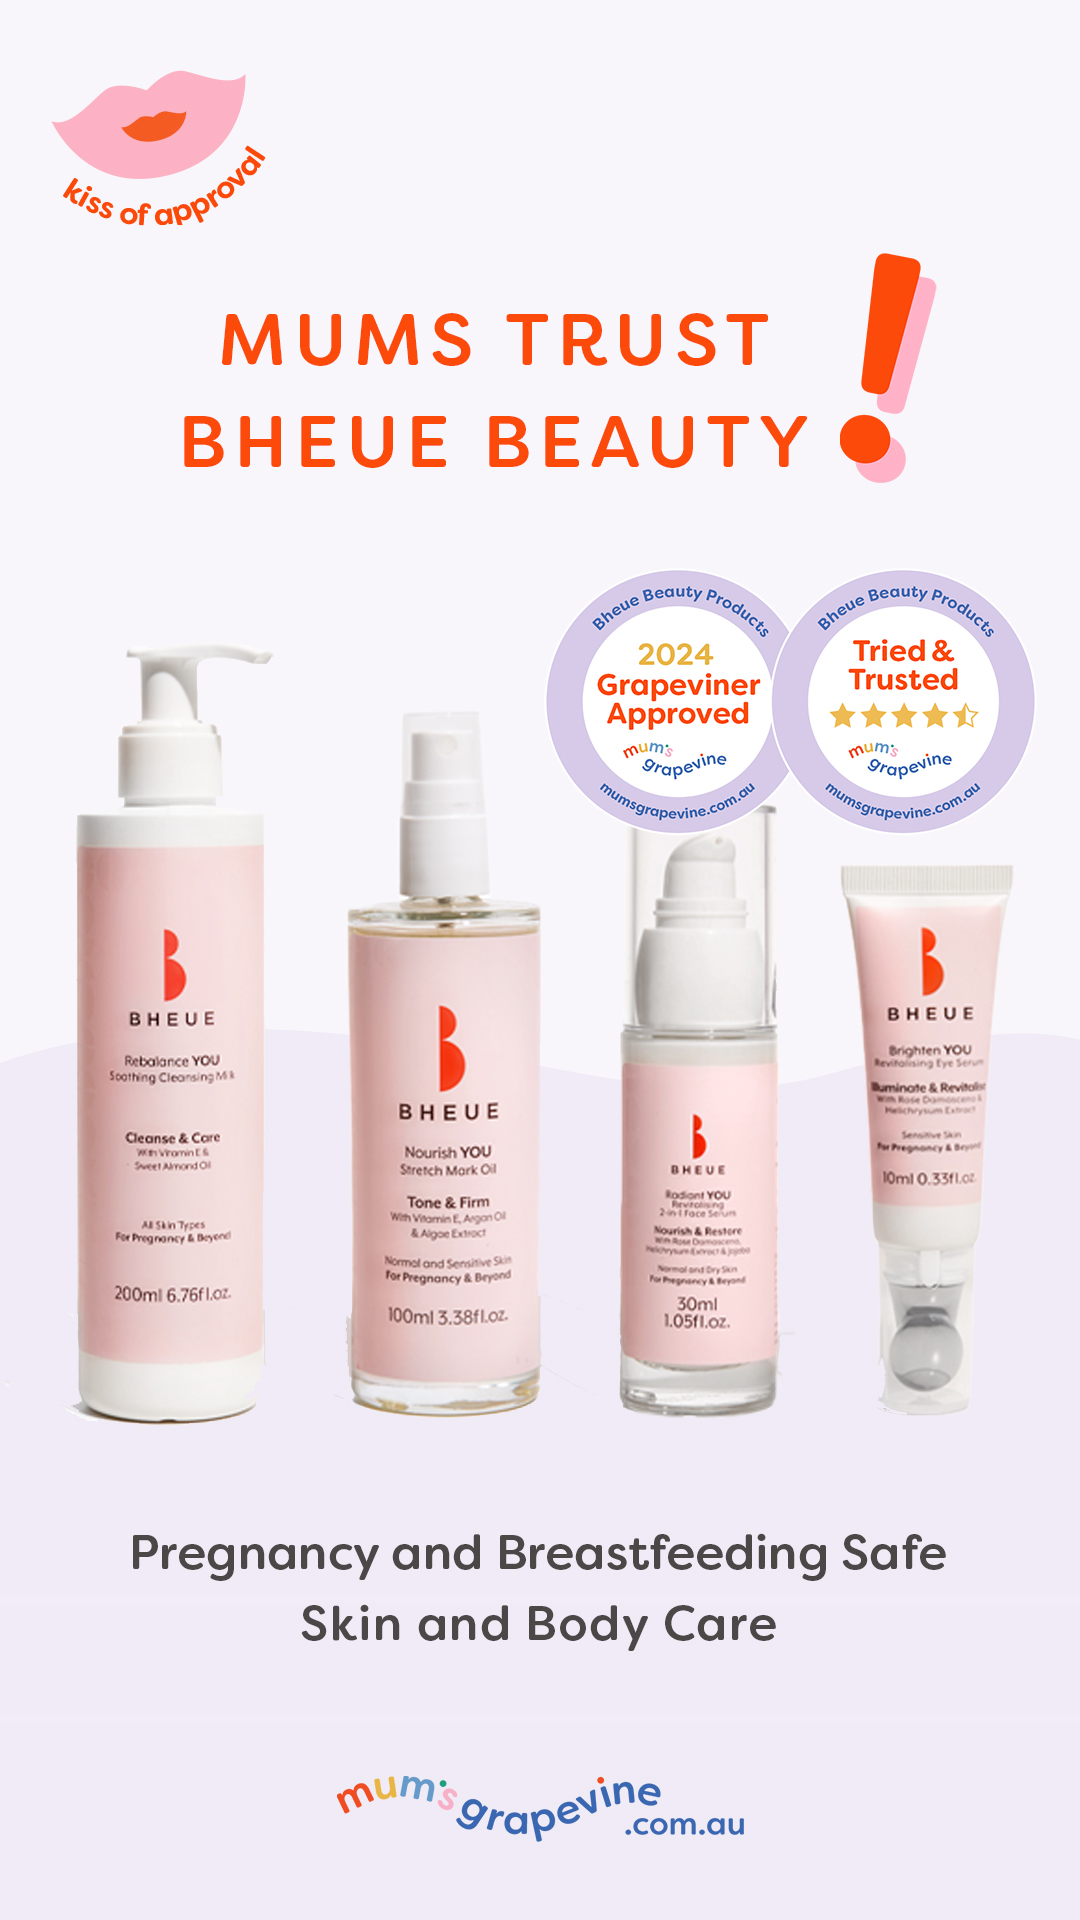 Bheue beauty products with Mum's Grapevine tried and trusted 5-star product review. 